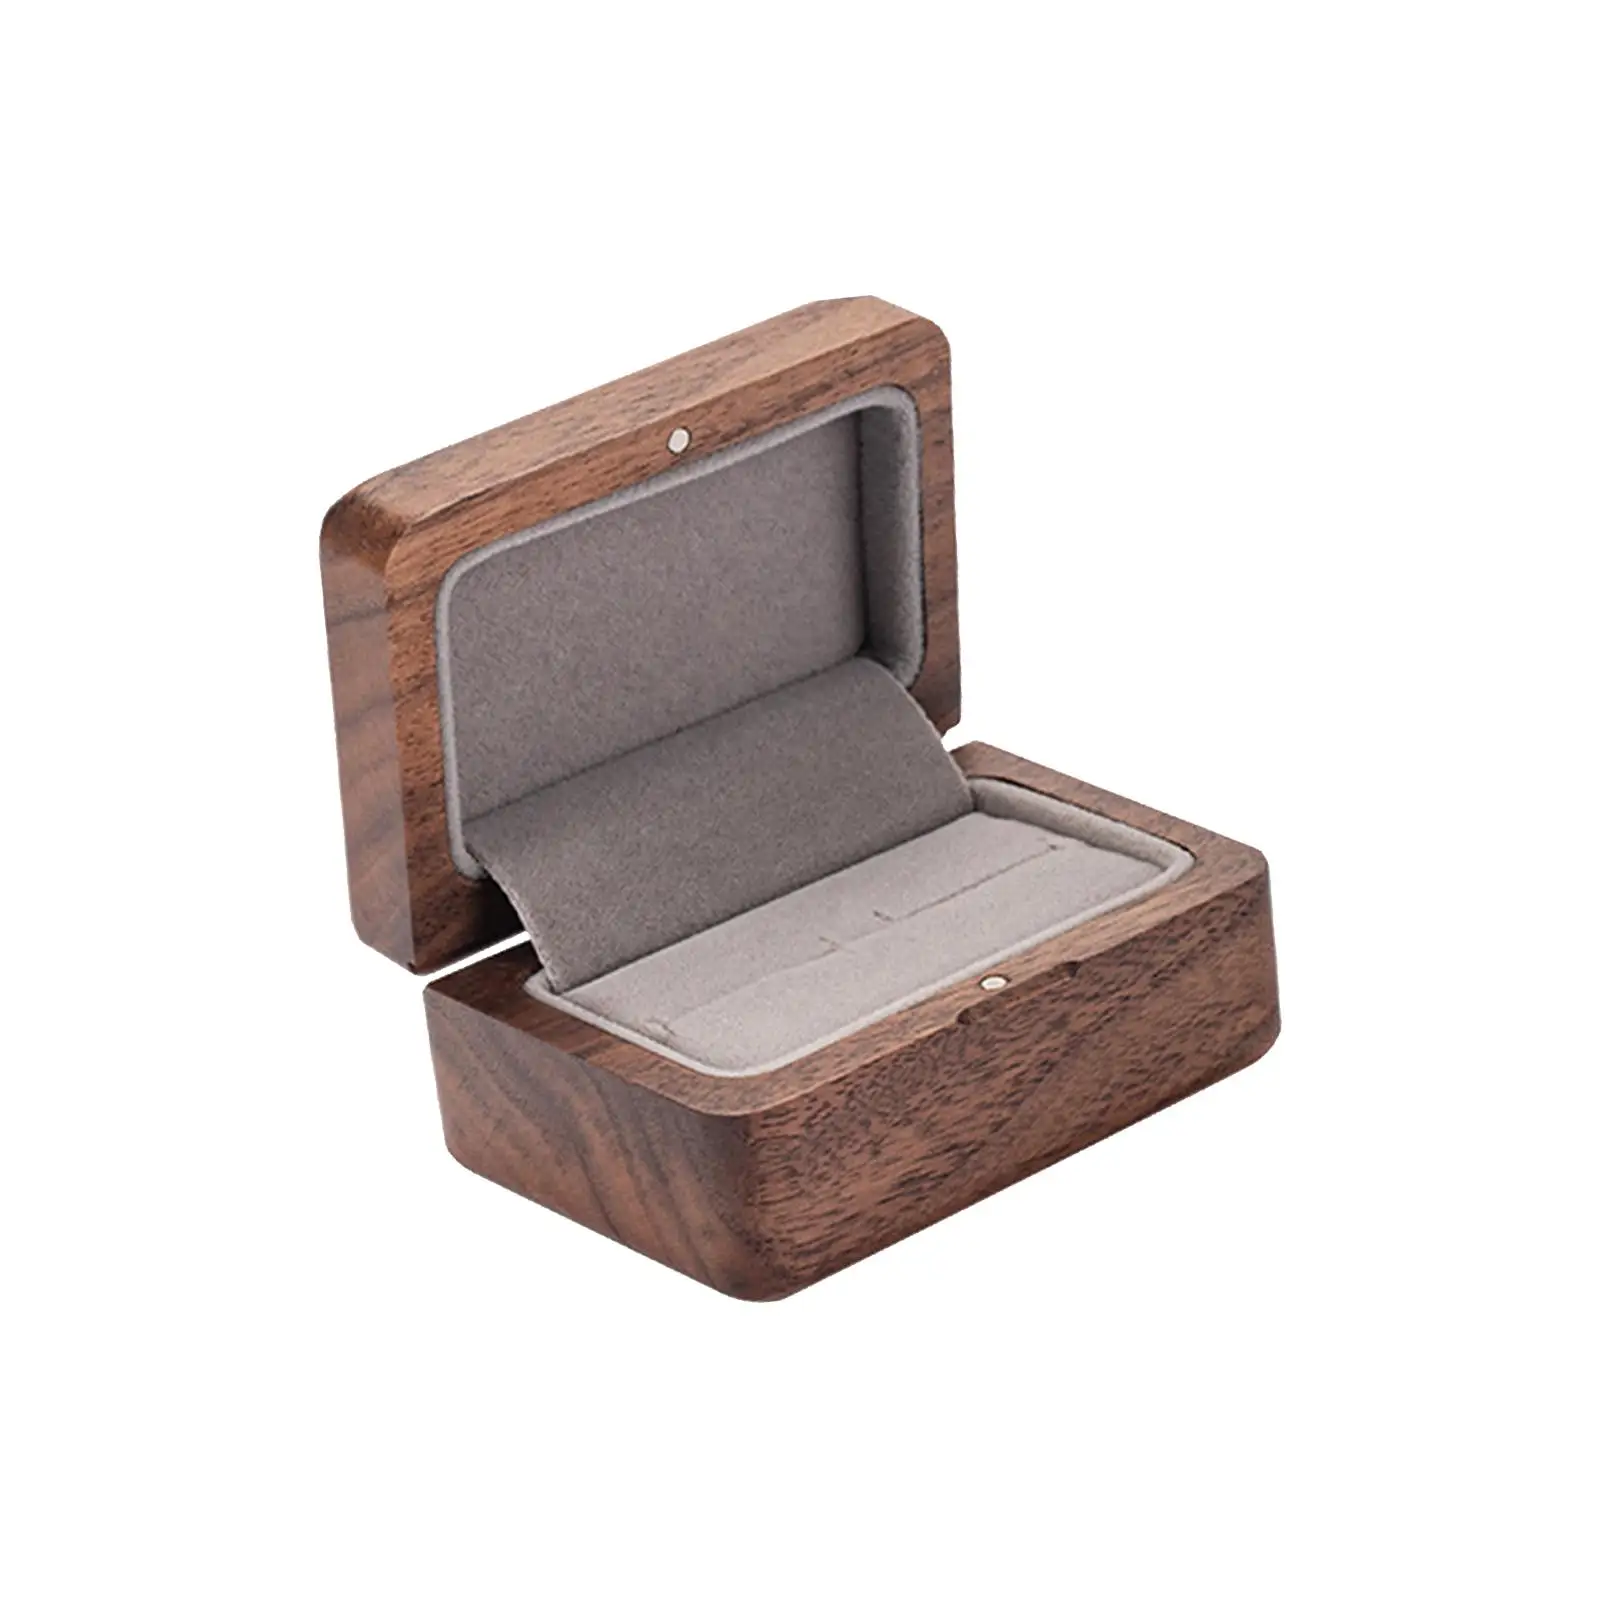 Wooden Ring Box Ring Gift Box Wedding Ring Box Wooden Ring Holder for Ceremony Engagement Anniversary Proposal Birthday Gift